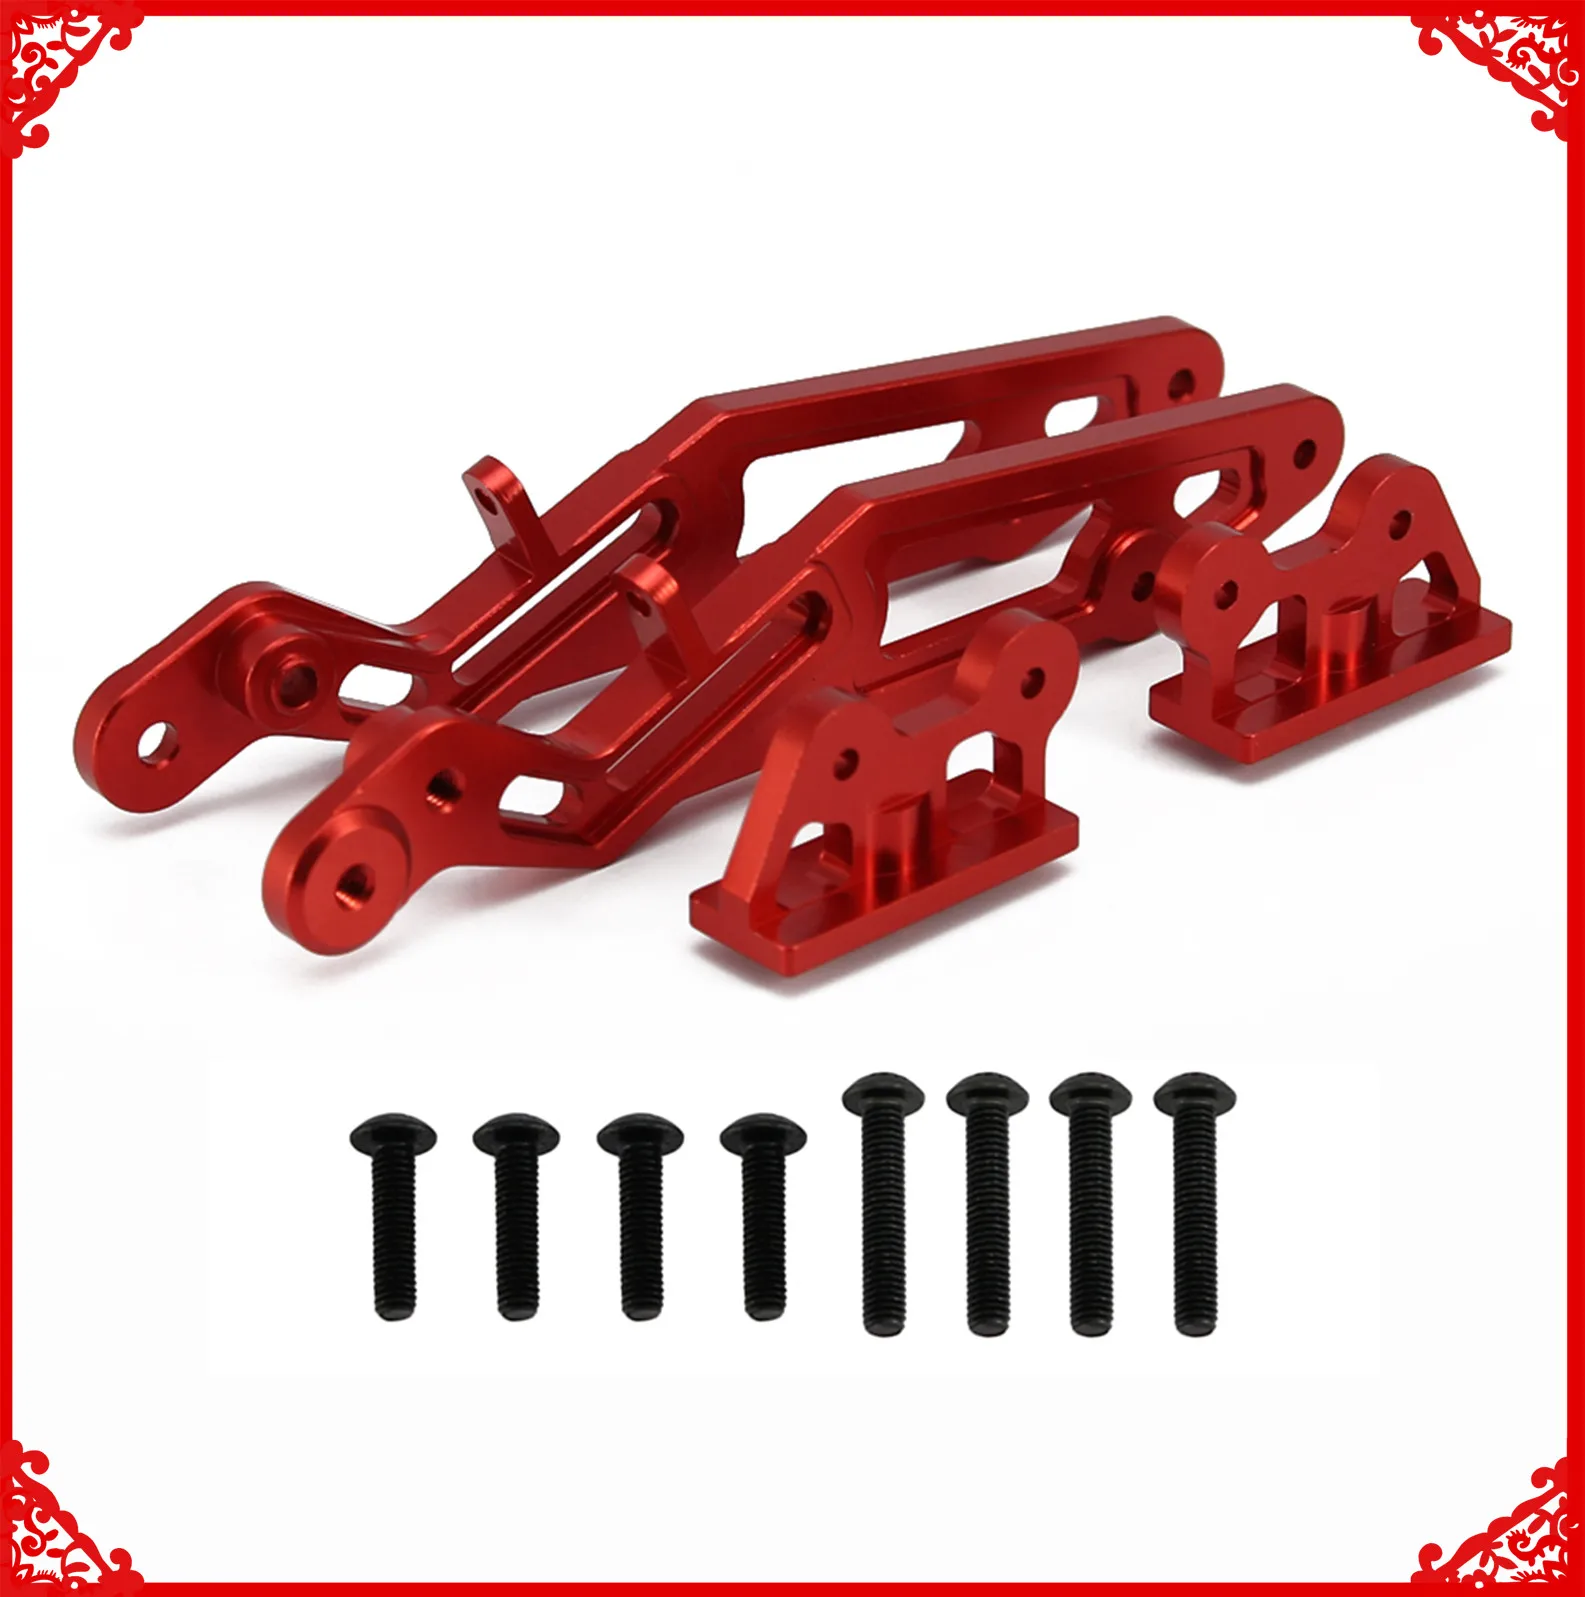 RCAWD AR320347 REAR WING MOUNT SET FOR ARRMA NOTORIOUS OUTCAST KRATON 6S 4WD BLX upgrade parts